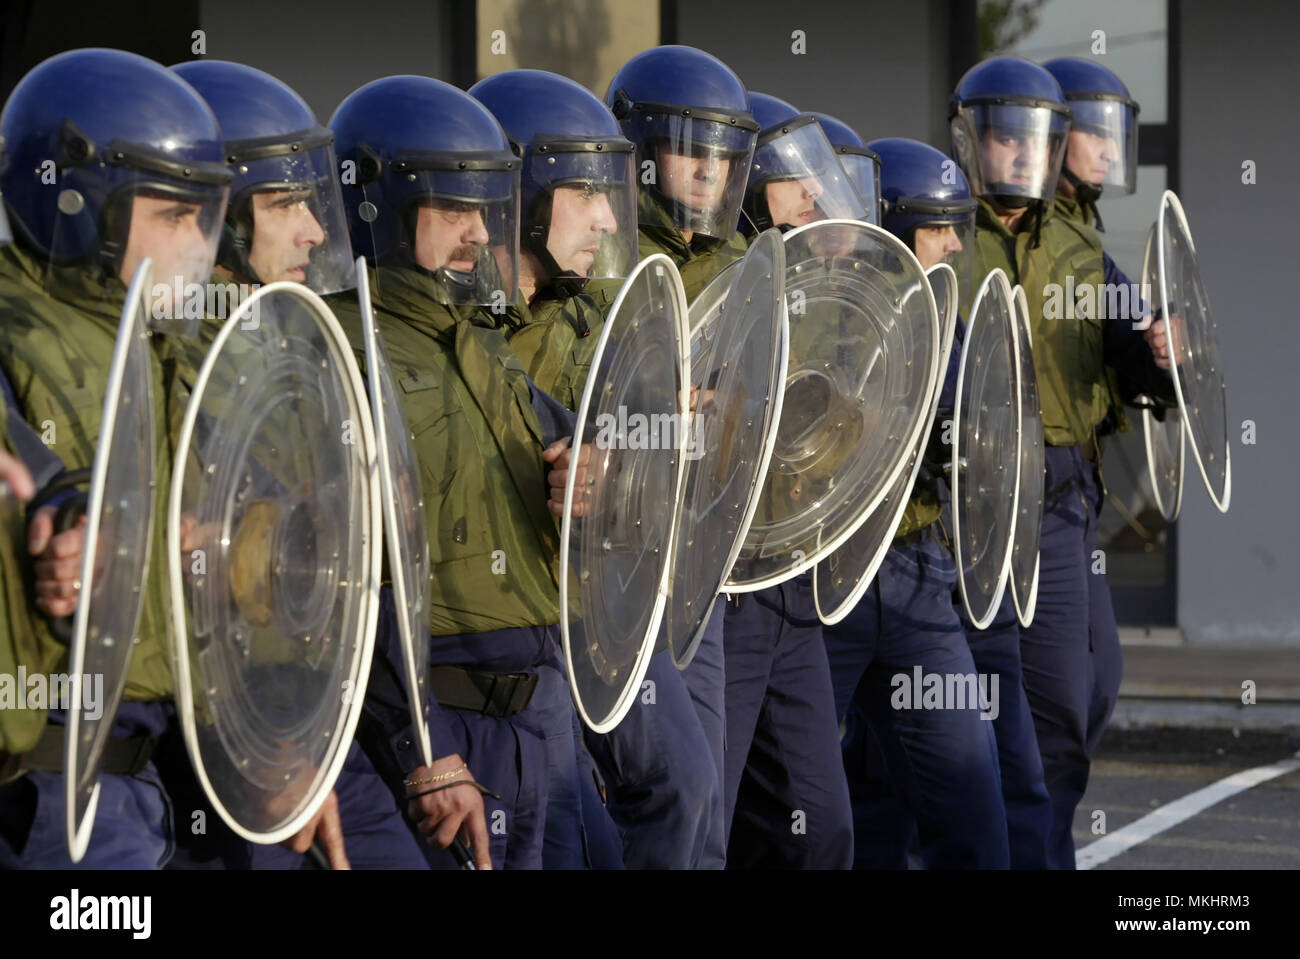 Riot police officers lined up with protective headgear and shields Stock Photo